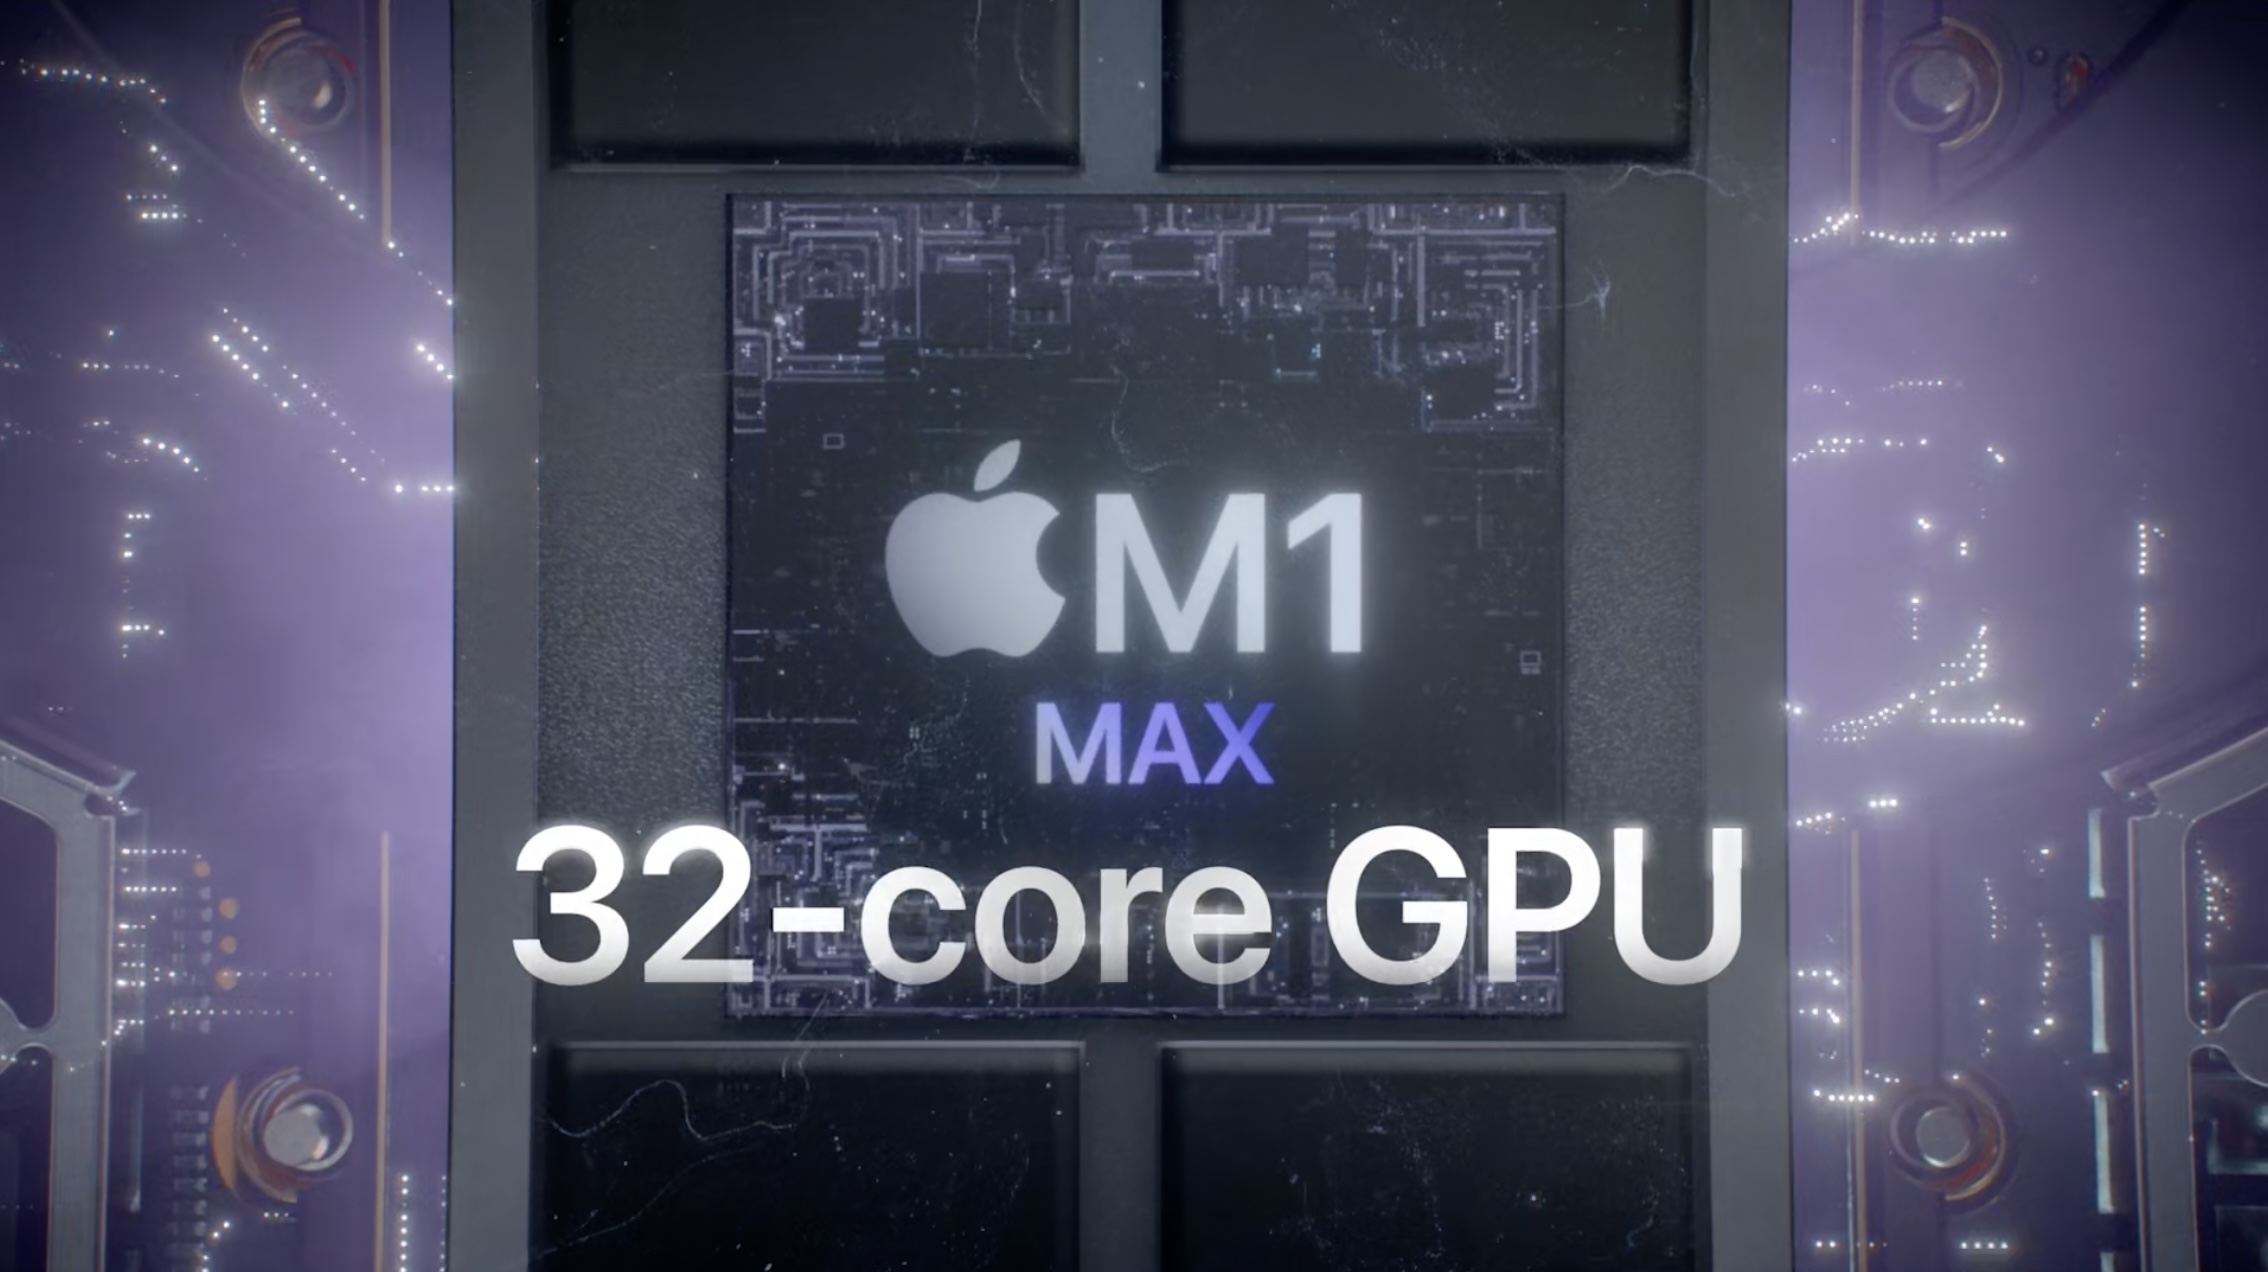 3ds max 8 revealed